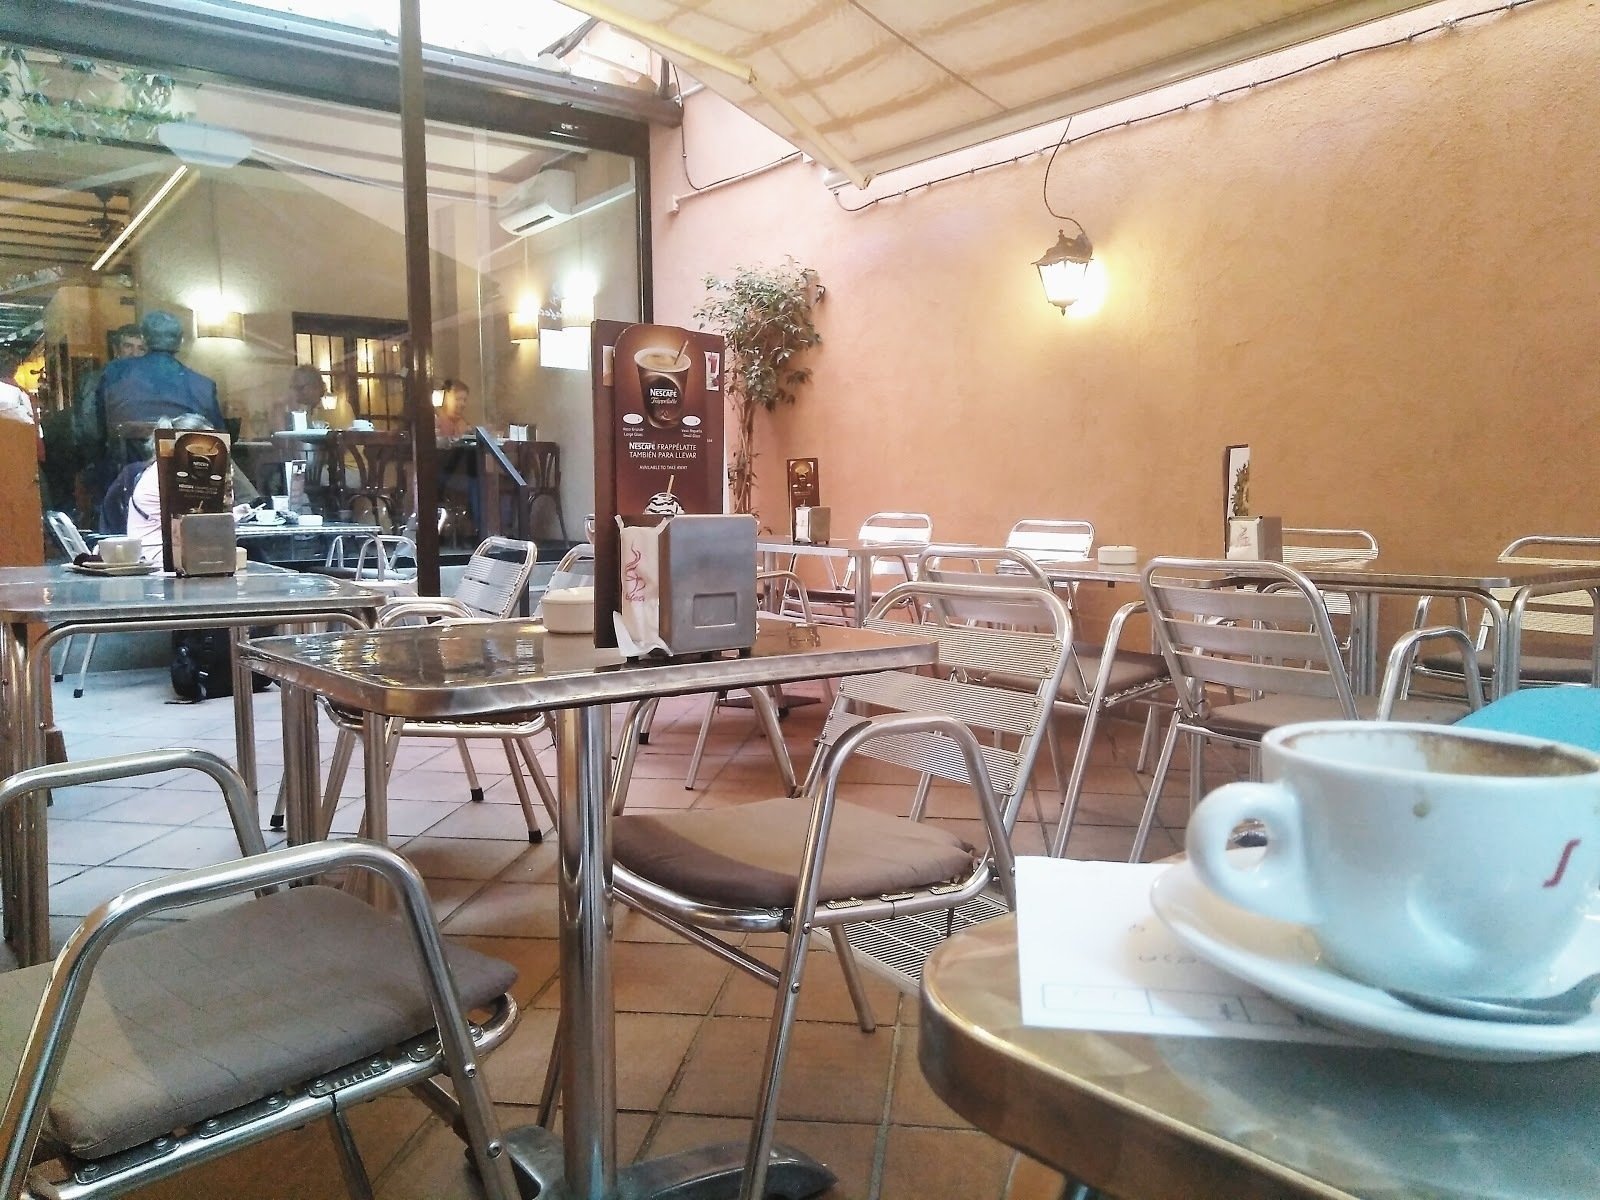 El Cafeto: A Work-Friendly Place in Barcelona